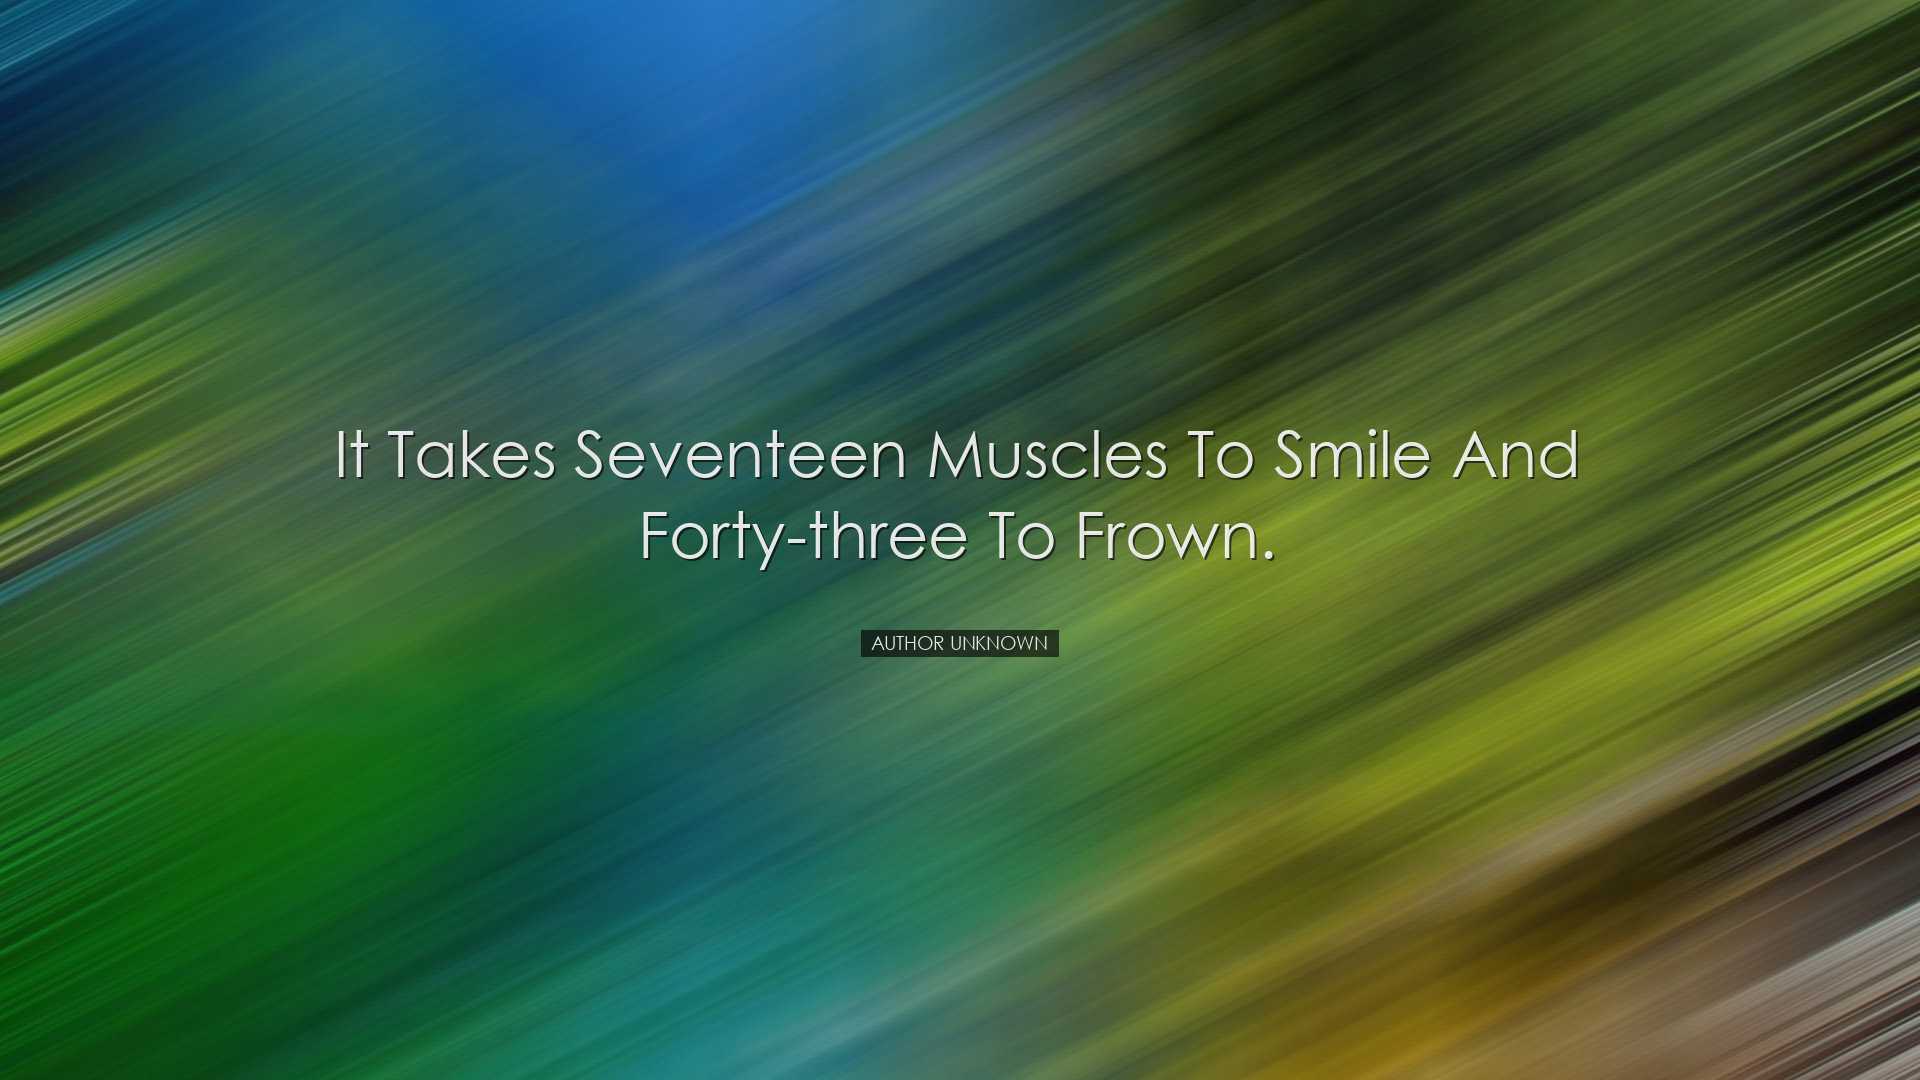 It takes seventeen muscles to smile and forty-three to frown. - Au